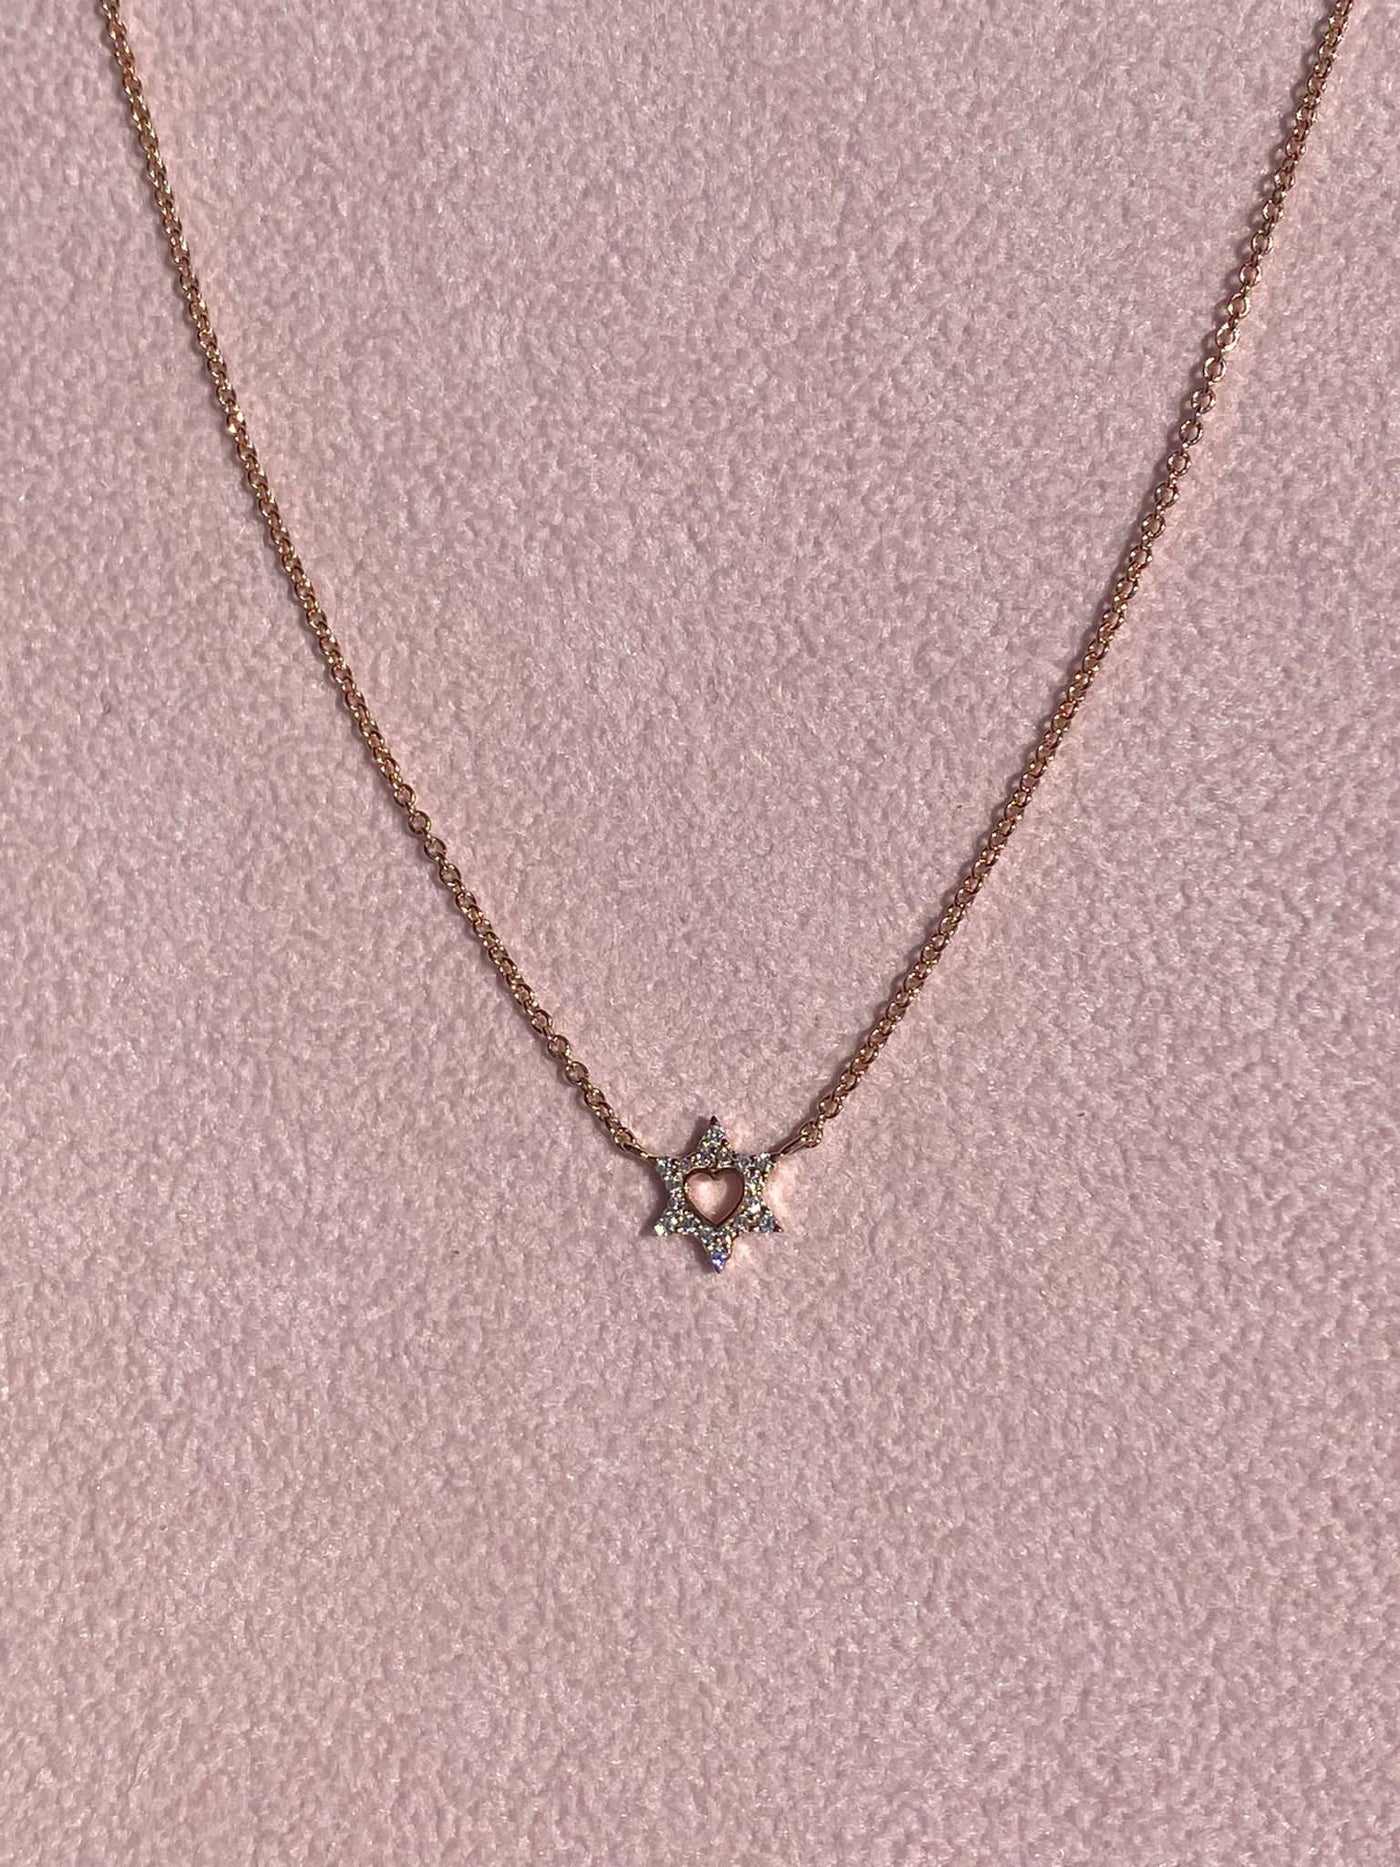 Heart Star of David necklace